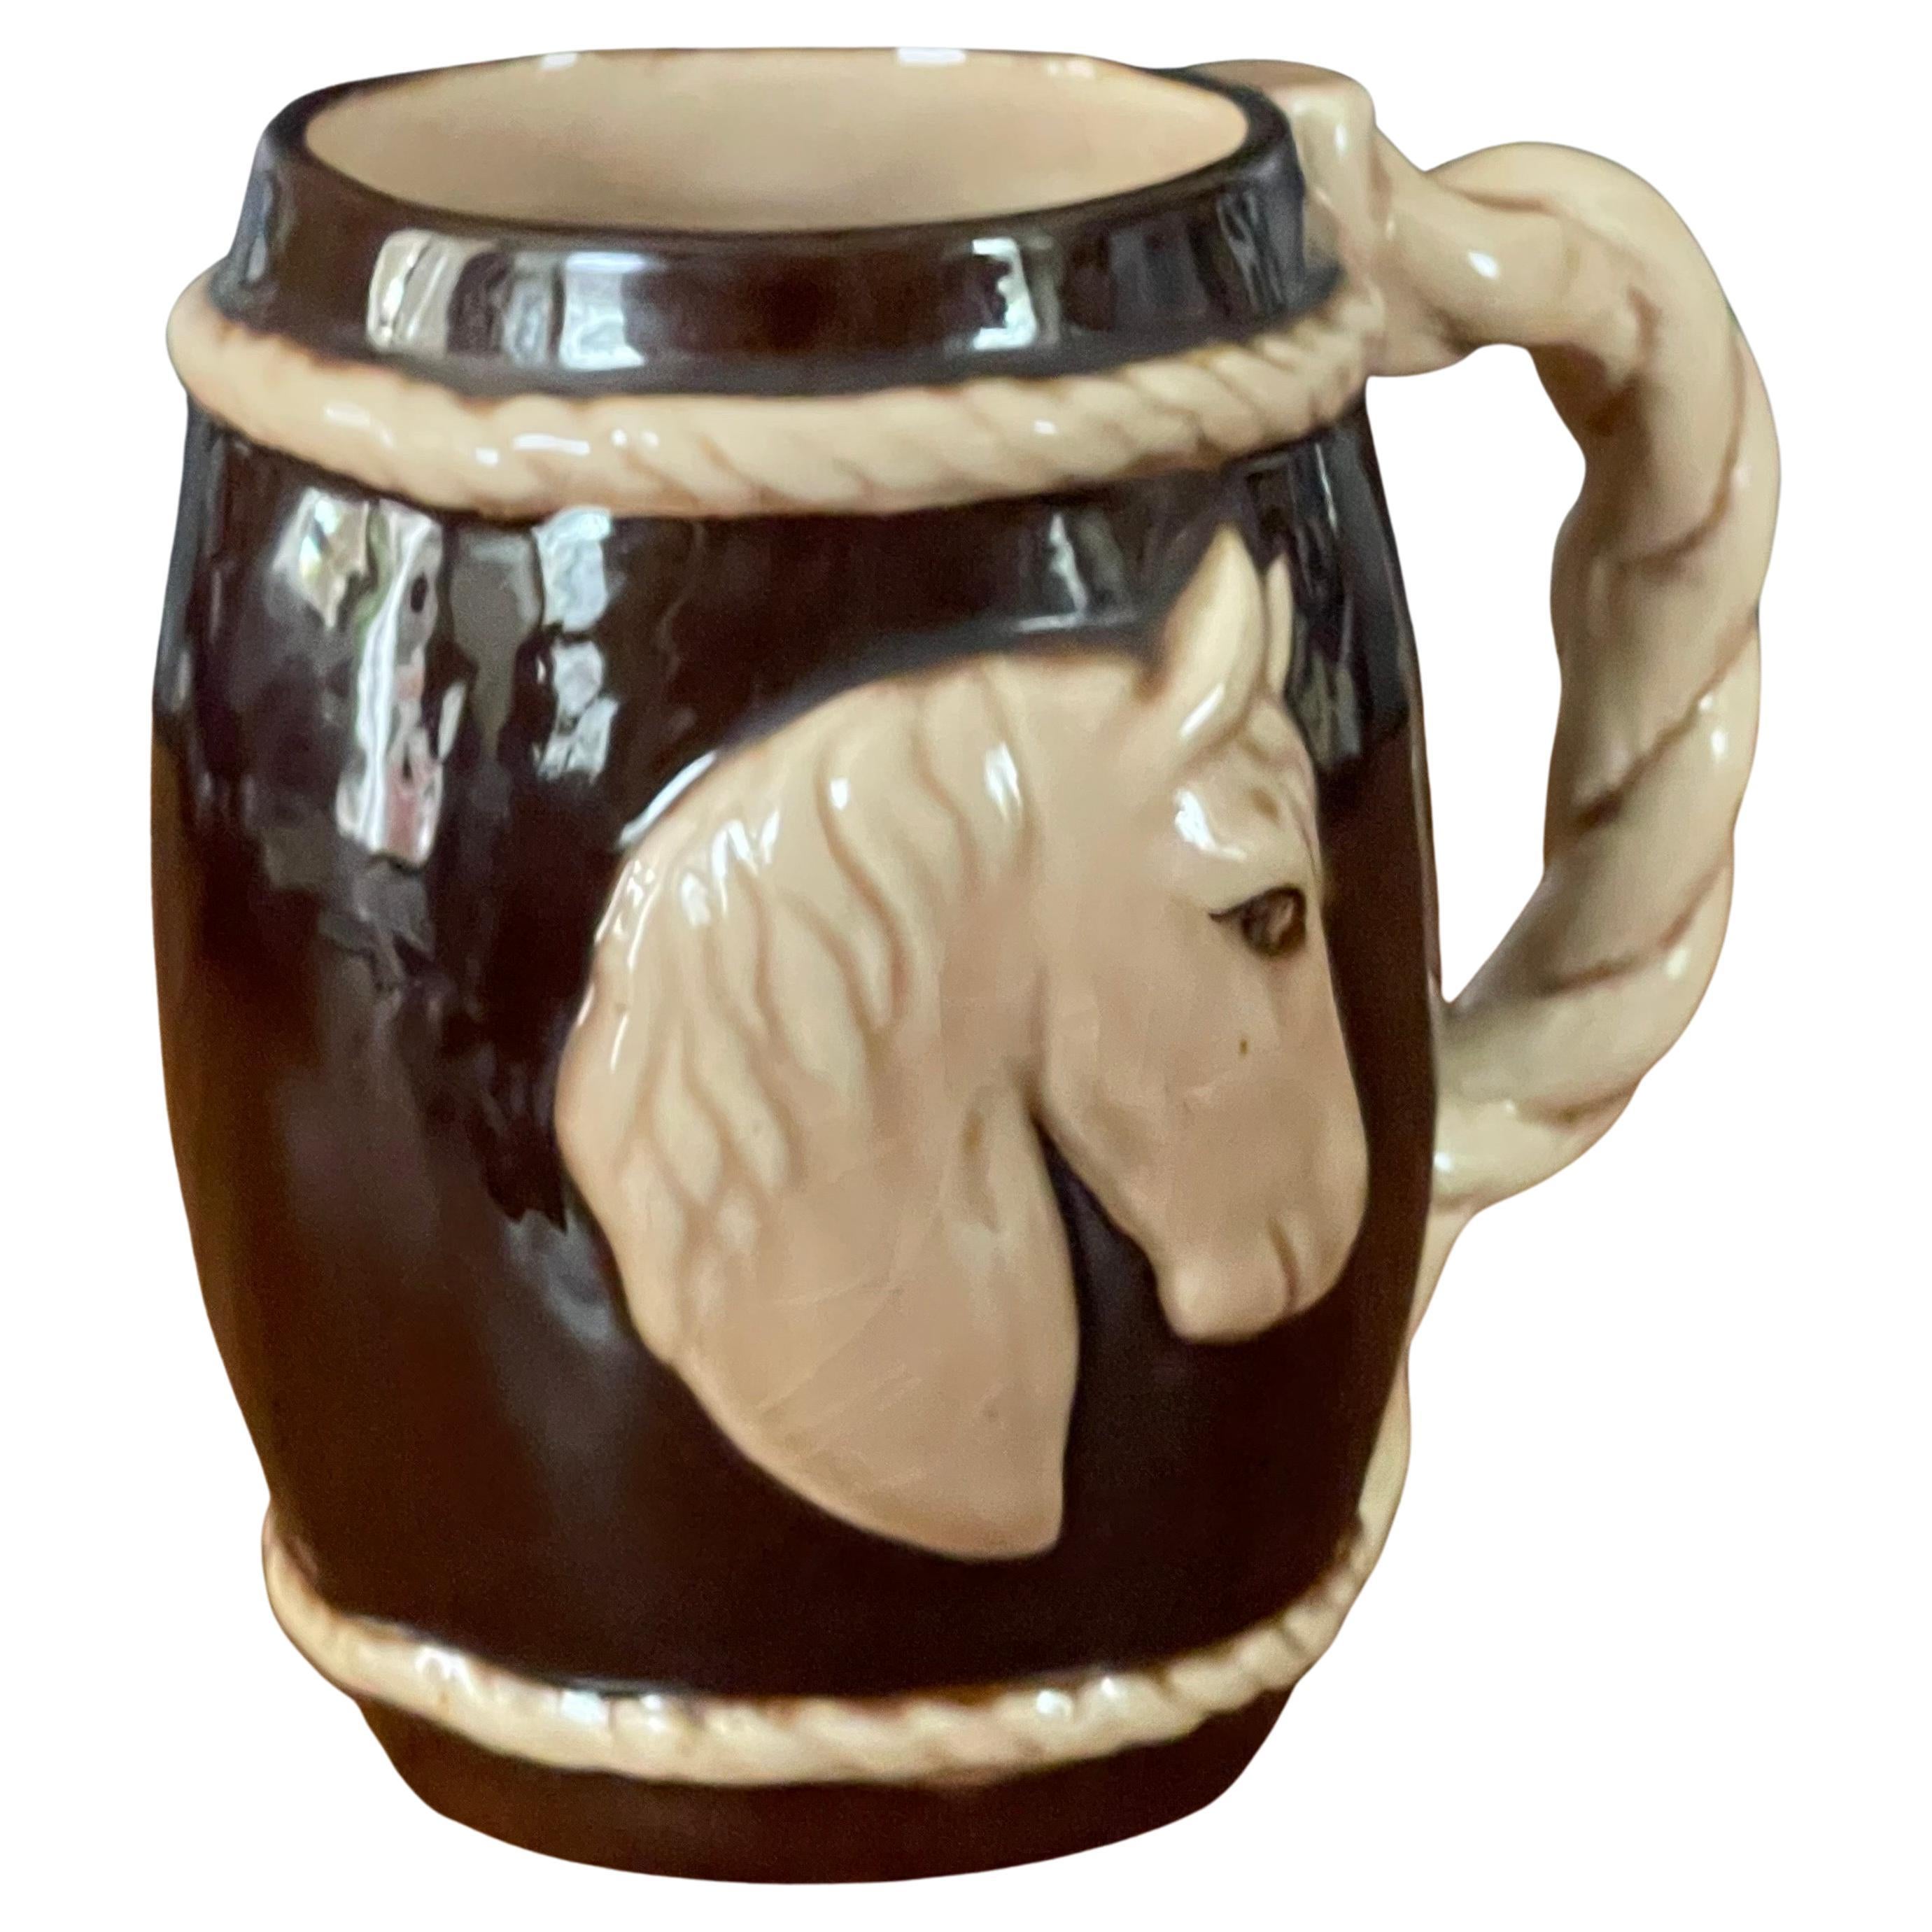 A fun ceramic barware horse mug by Dorothy Kindell, circa 1940s. This hard to find piece is in good vintage condition (some crazing is present) and measures 4.5